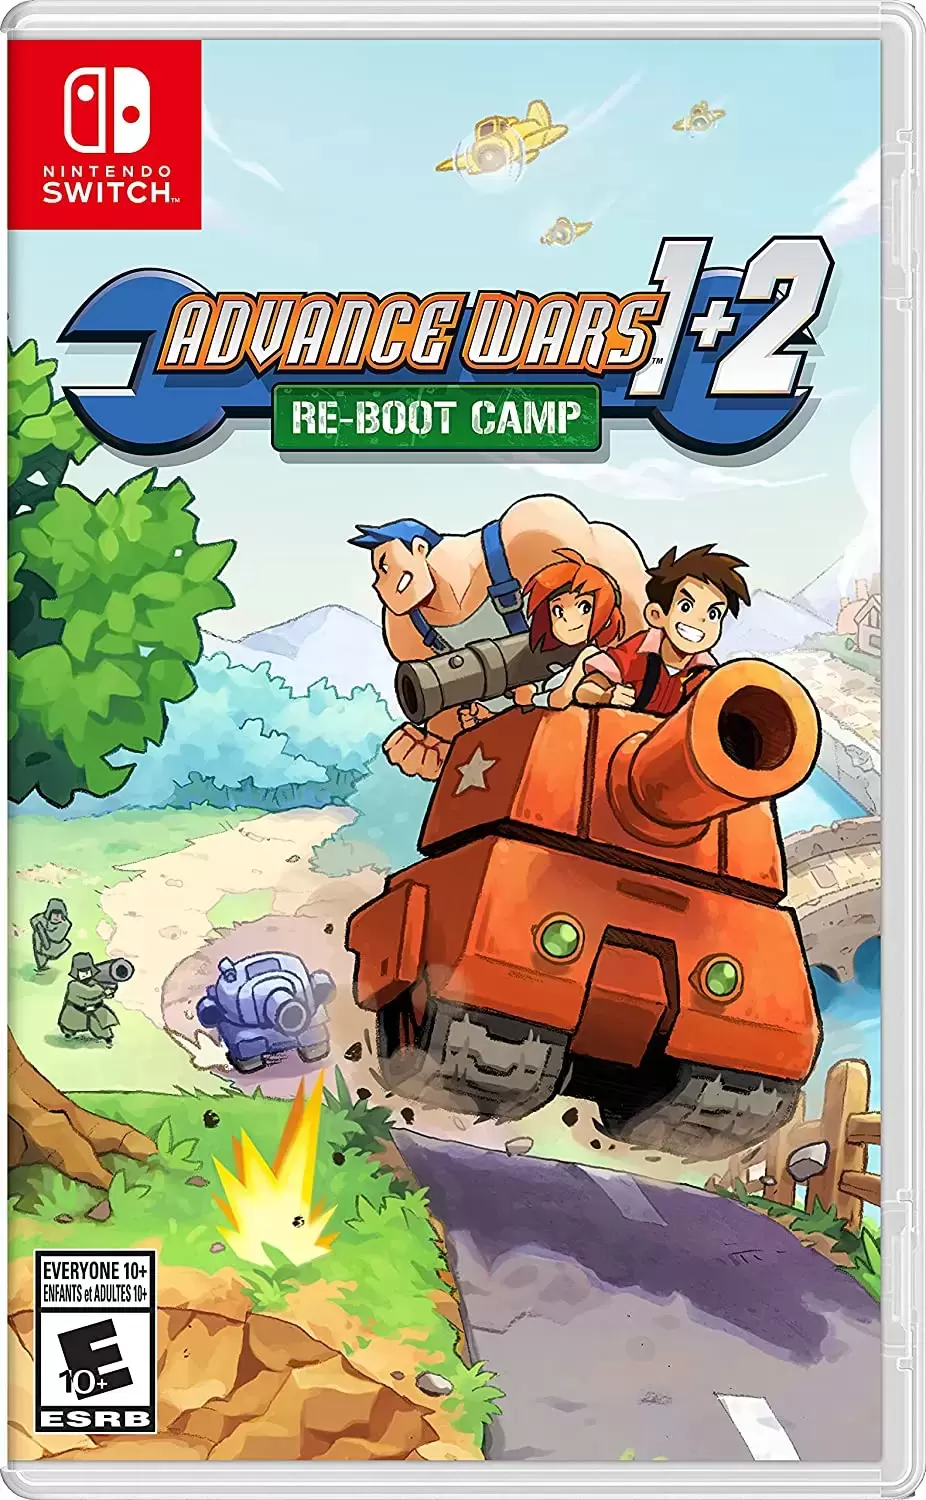 Nintendo Switch Games - Advance Wars 1+2: Re-Boot Camp